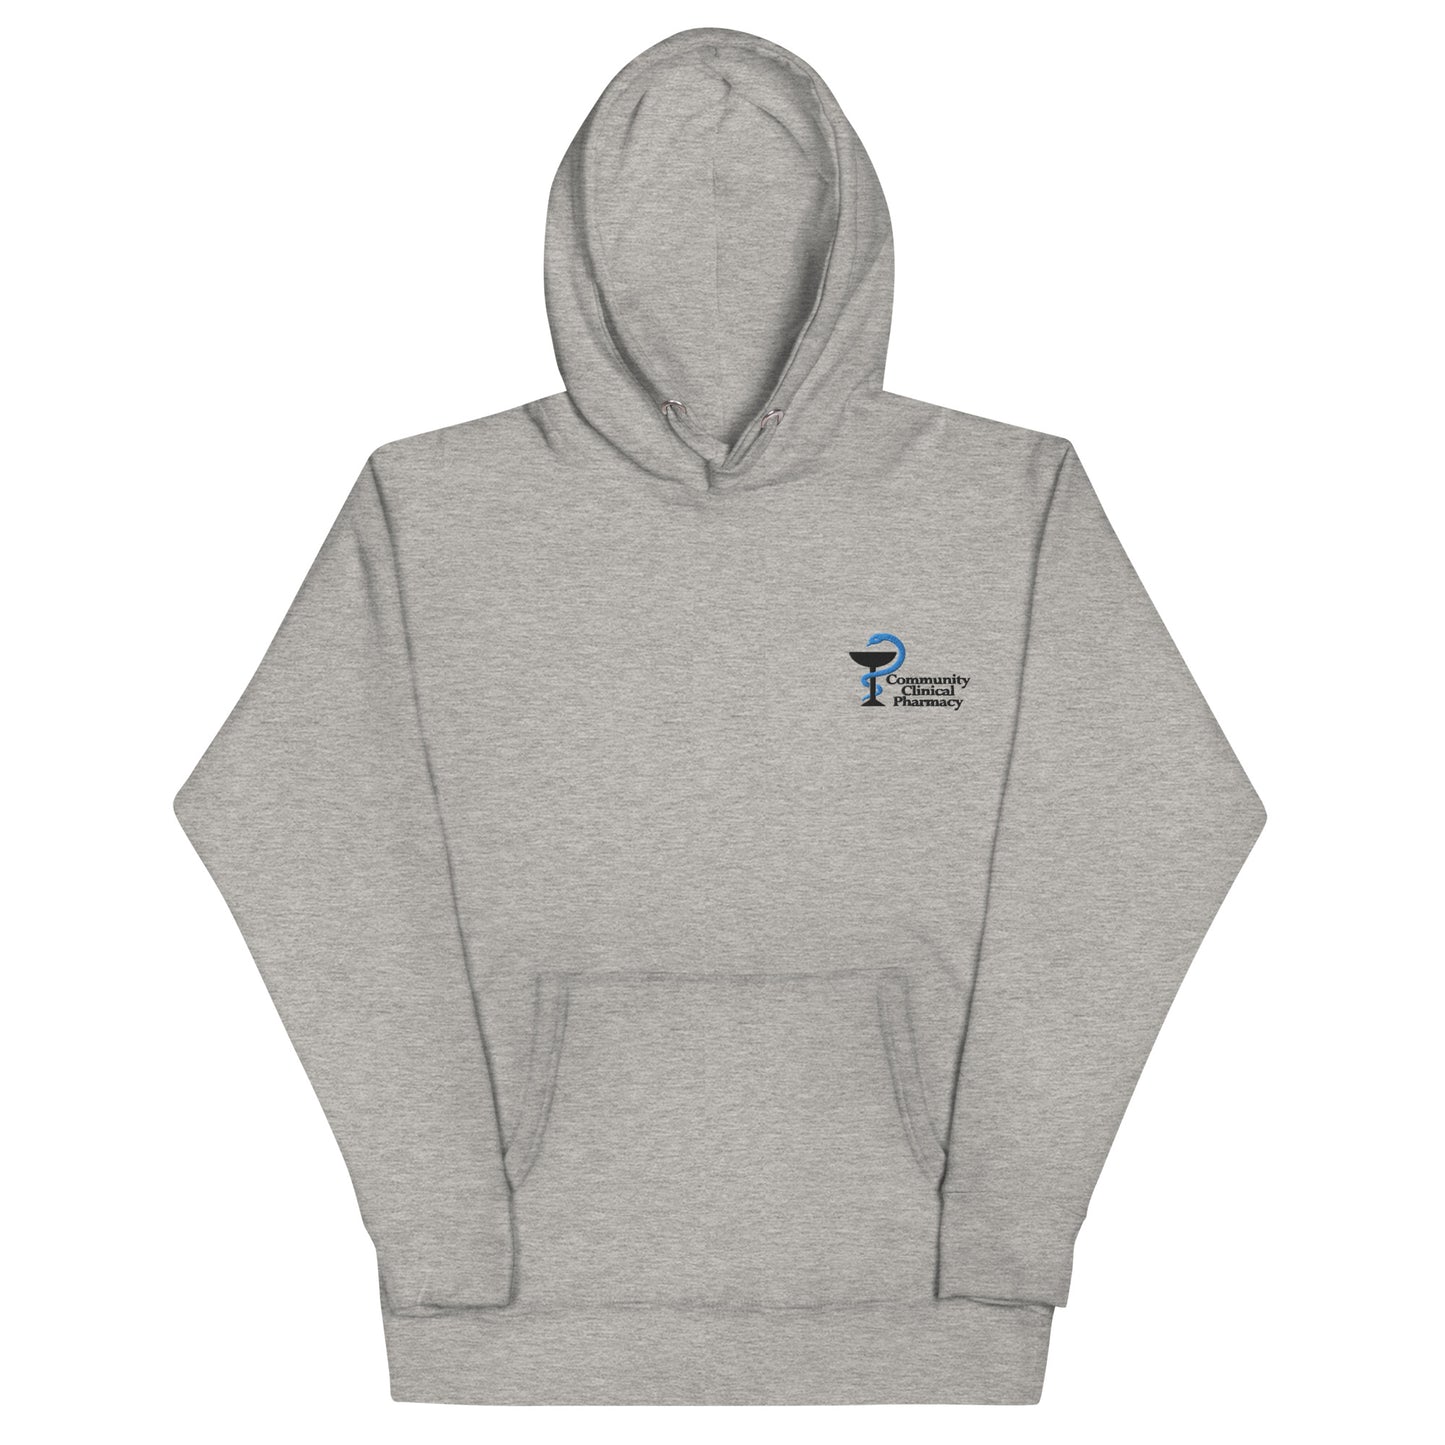 Unisex Premium Hoodie (fitted cut) - Community Clinical Pharmacy